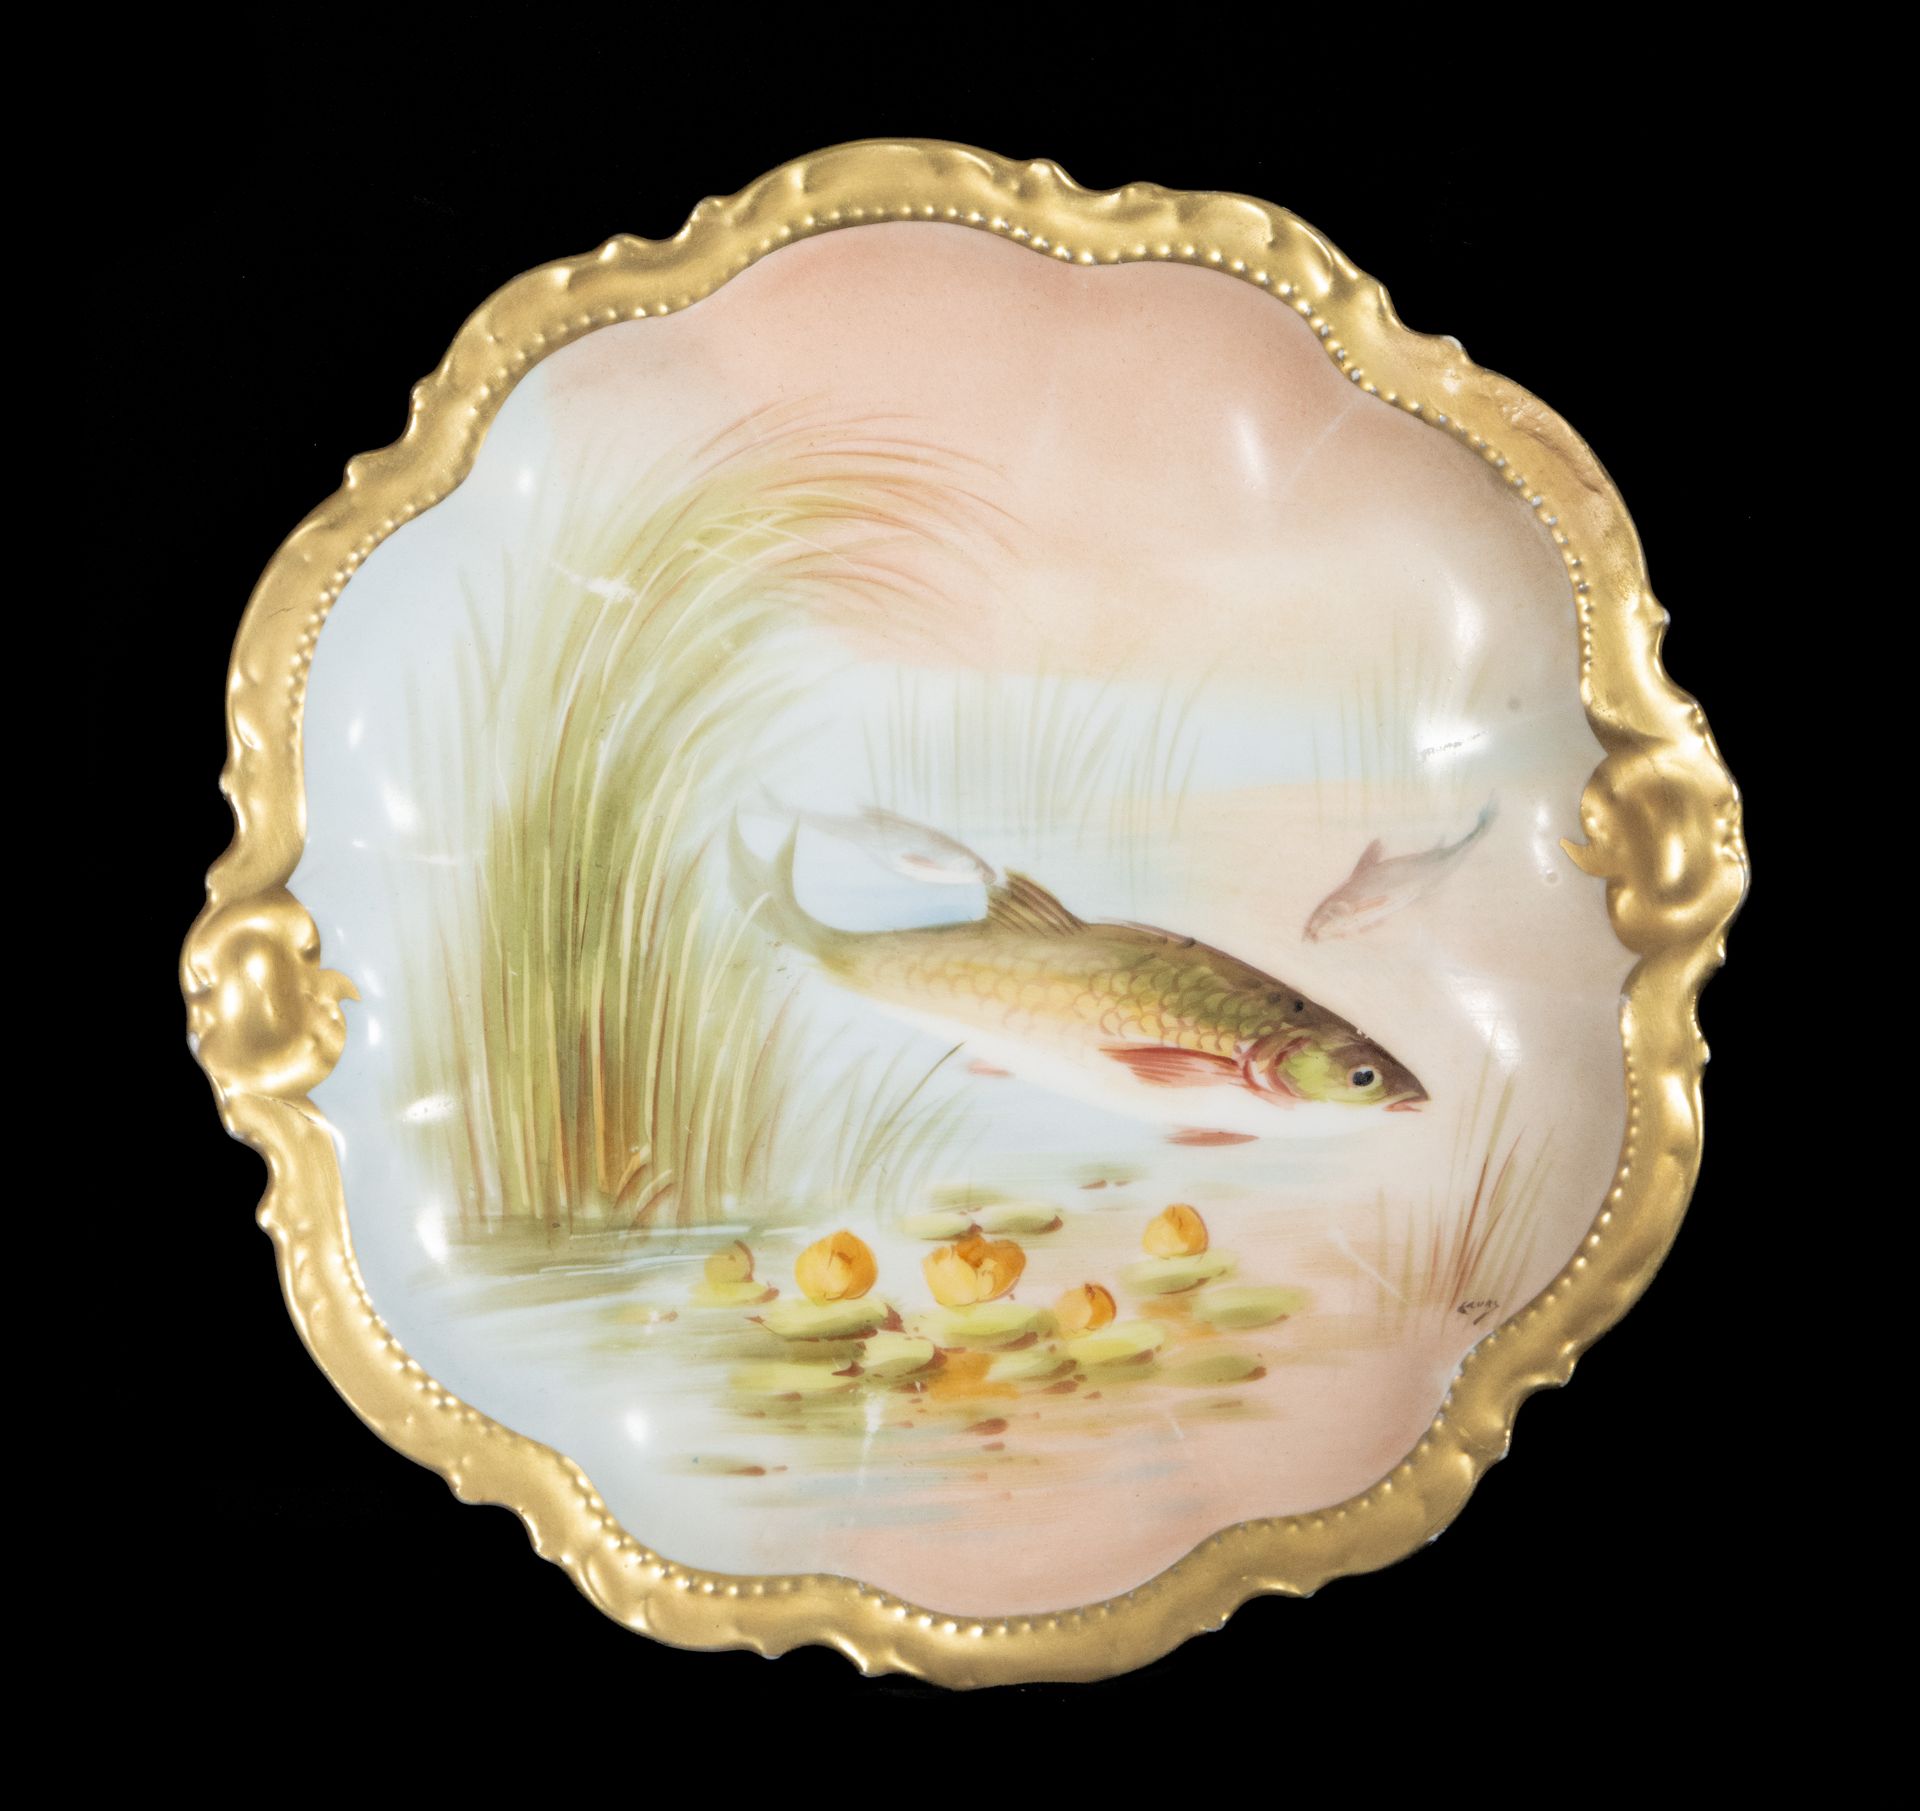 19th Century Limoges Porcelain Fish Dinnerware Set by the Count of Artois, 19th Century - Image 9 of 12